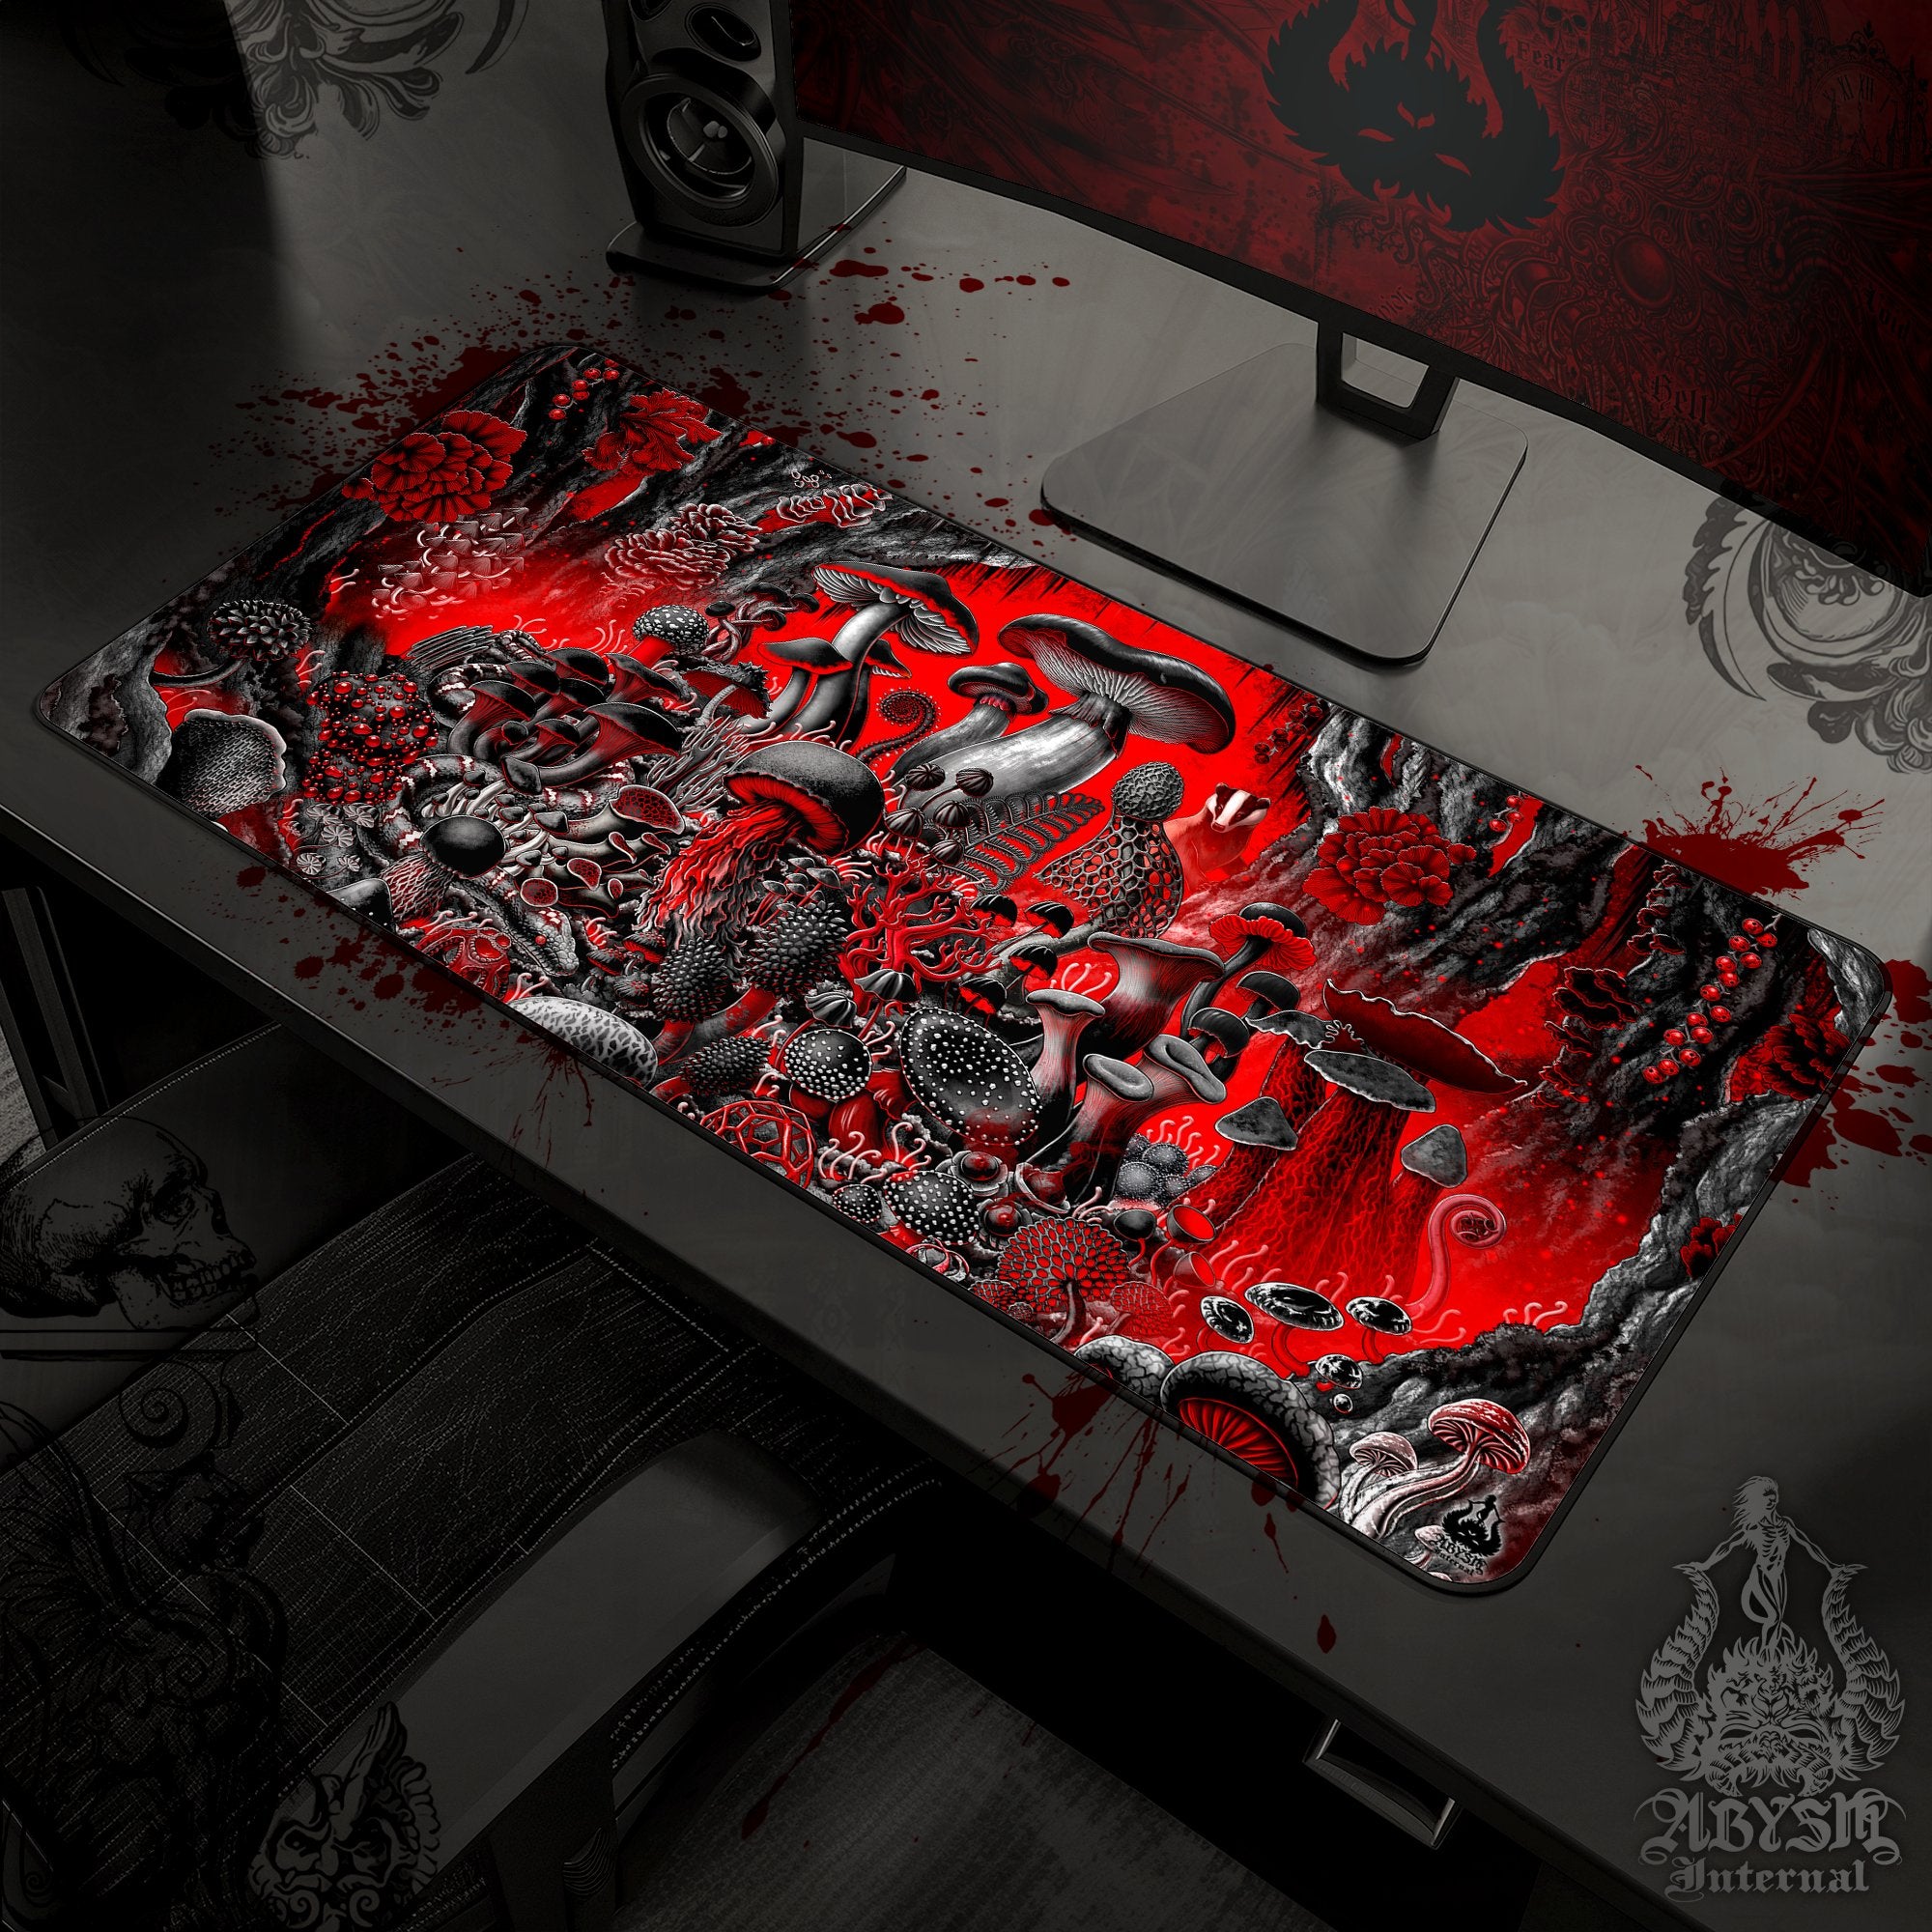 Gothic Gaming Mouse Pad, Bloody Goth Mushrooms Desk Mat, Black and Red Table Protector Cover, Magic Forest Workpad - Abysm Internal